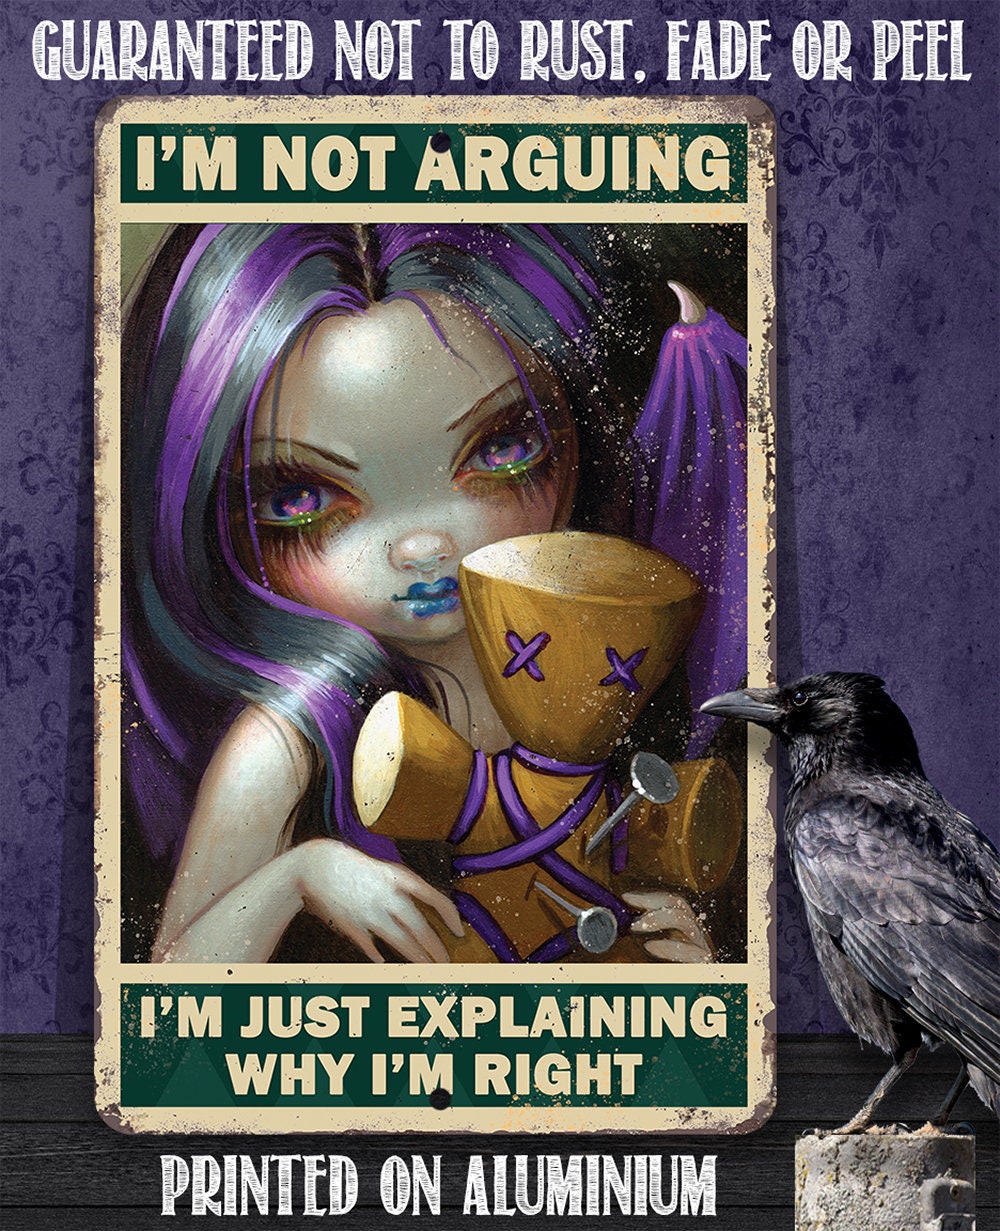 I'm Not Arguing, Just Explaining Why I'm Right - 8" x 12" or 12" x 18" Aluminum Tin Awesome Metal Poster Lone Star Art 